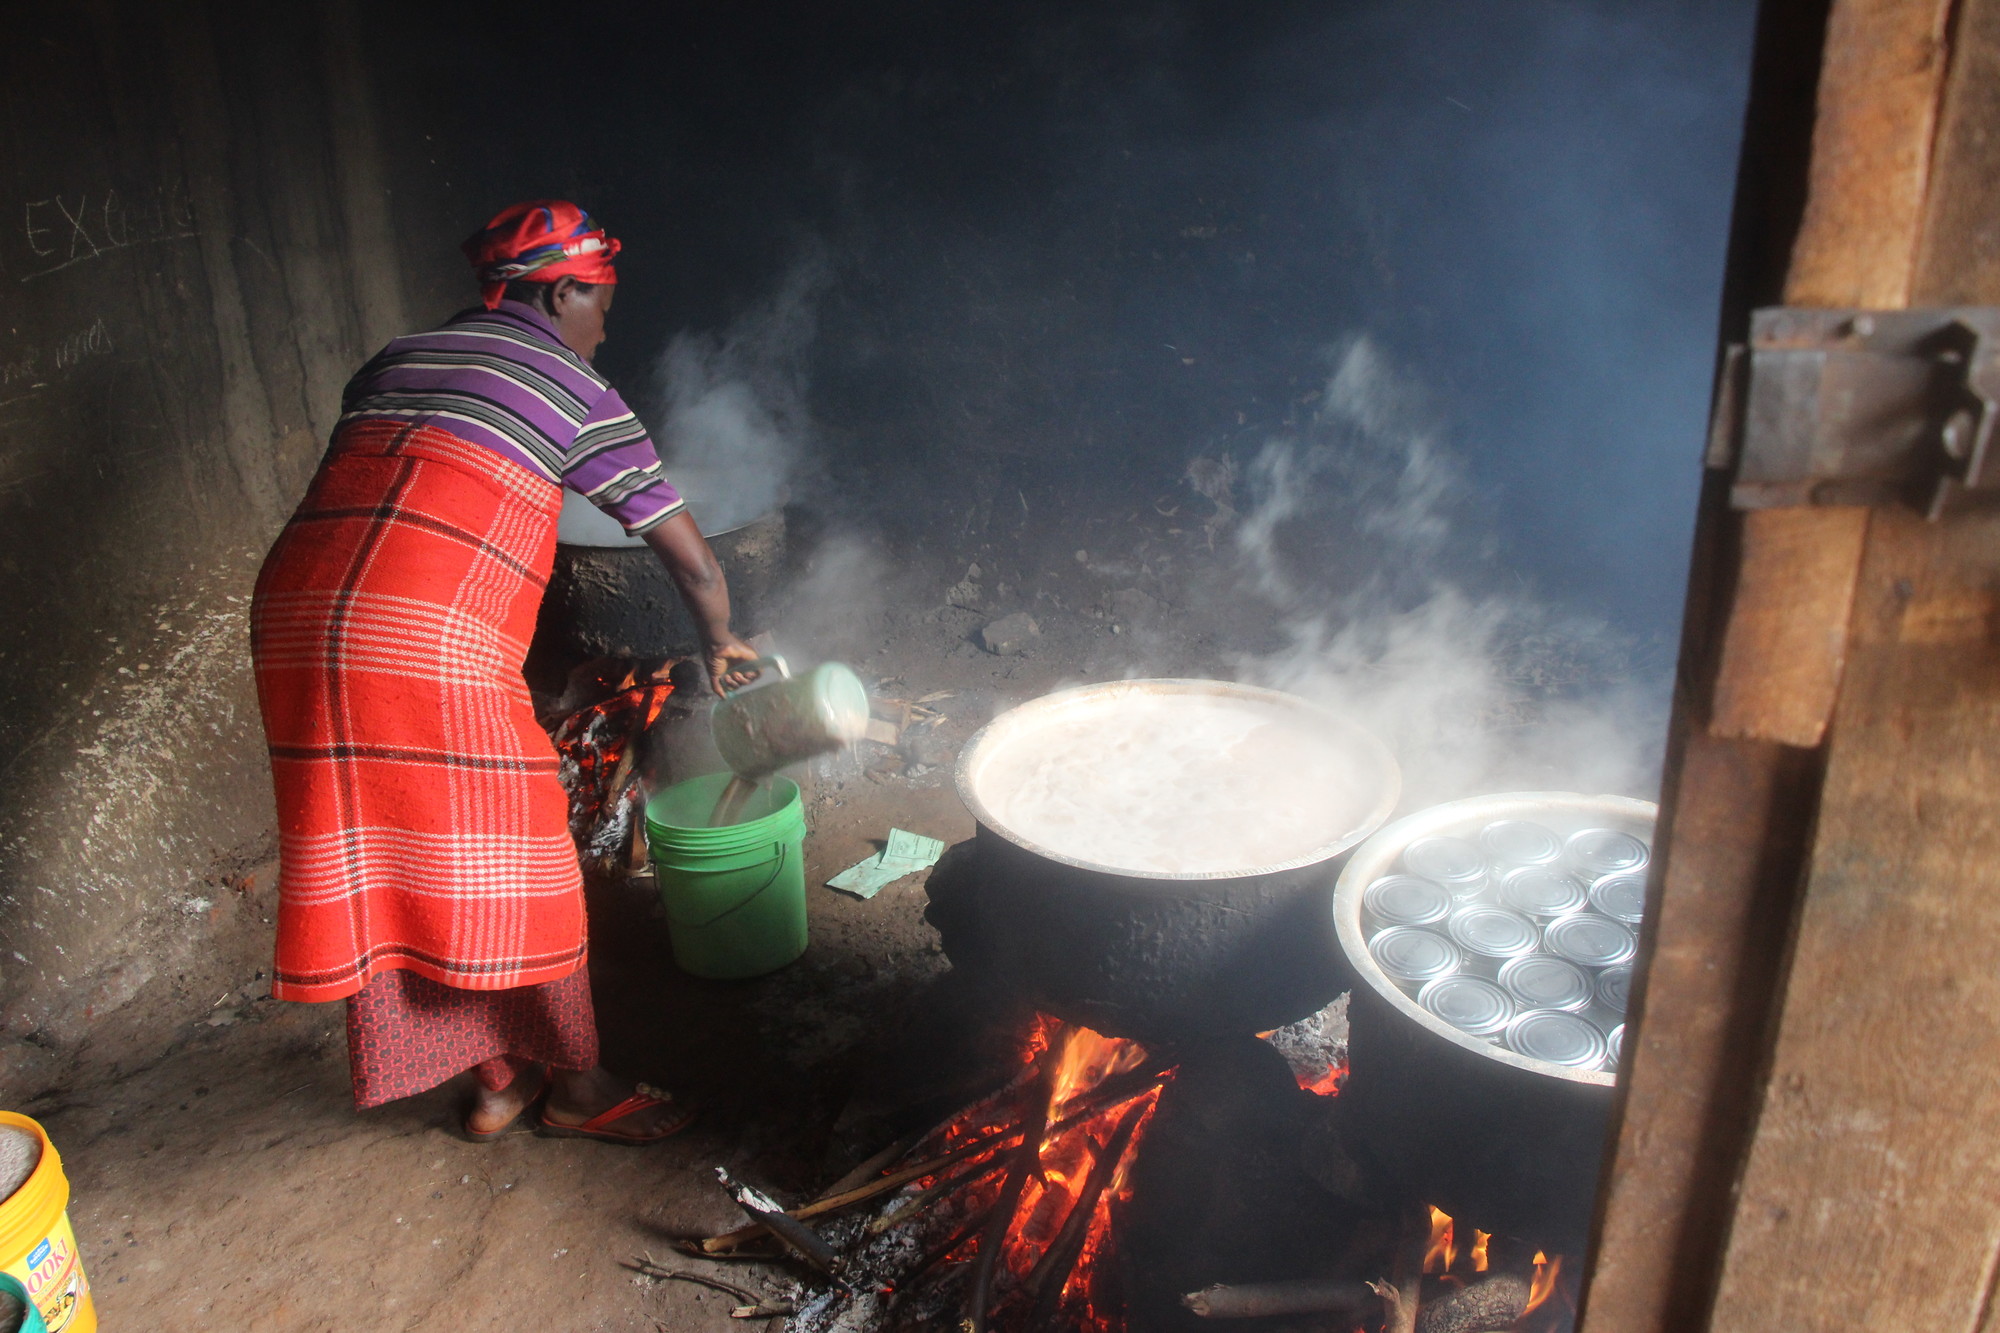 A Burundi woman poors liquid into a green bucket. Beside her are three large pots cooking over open fires